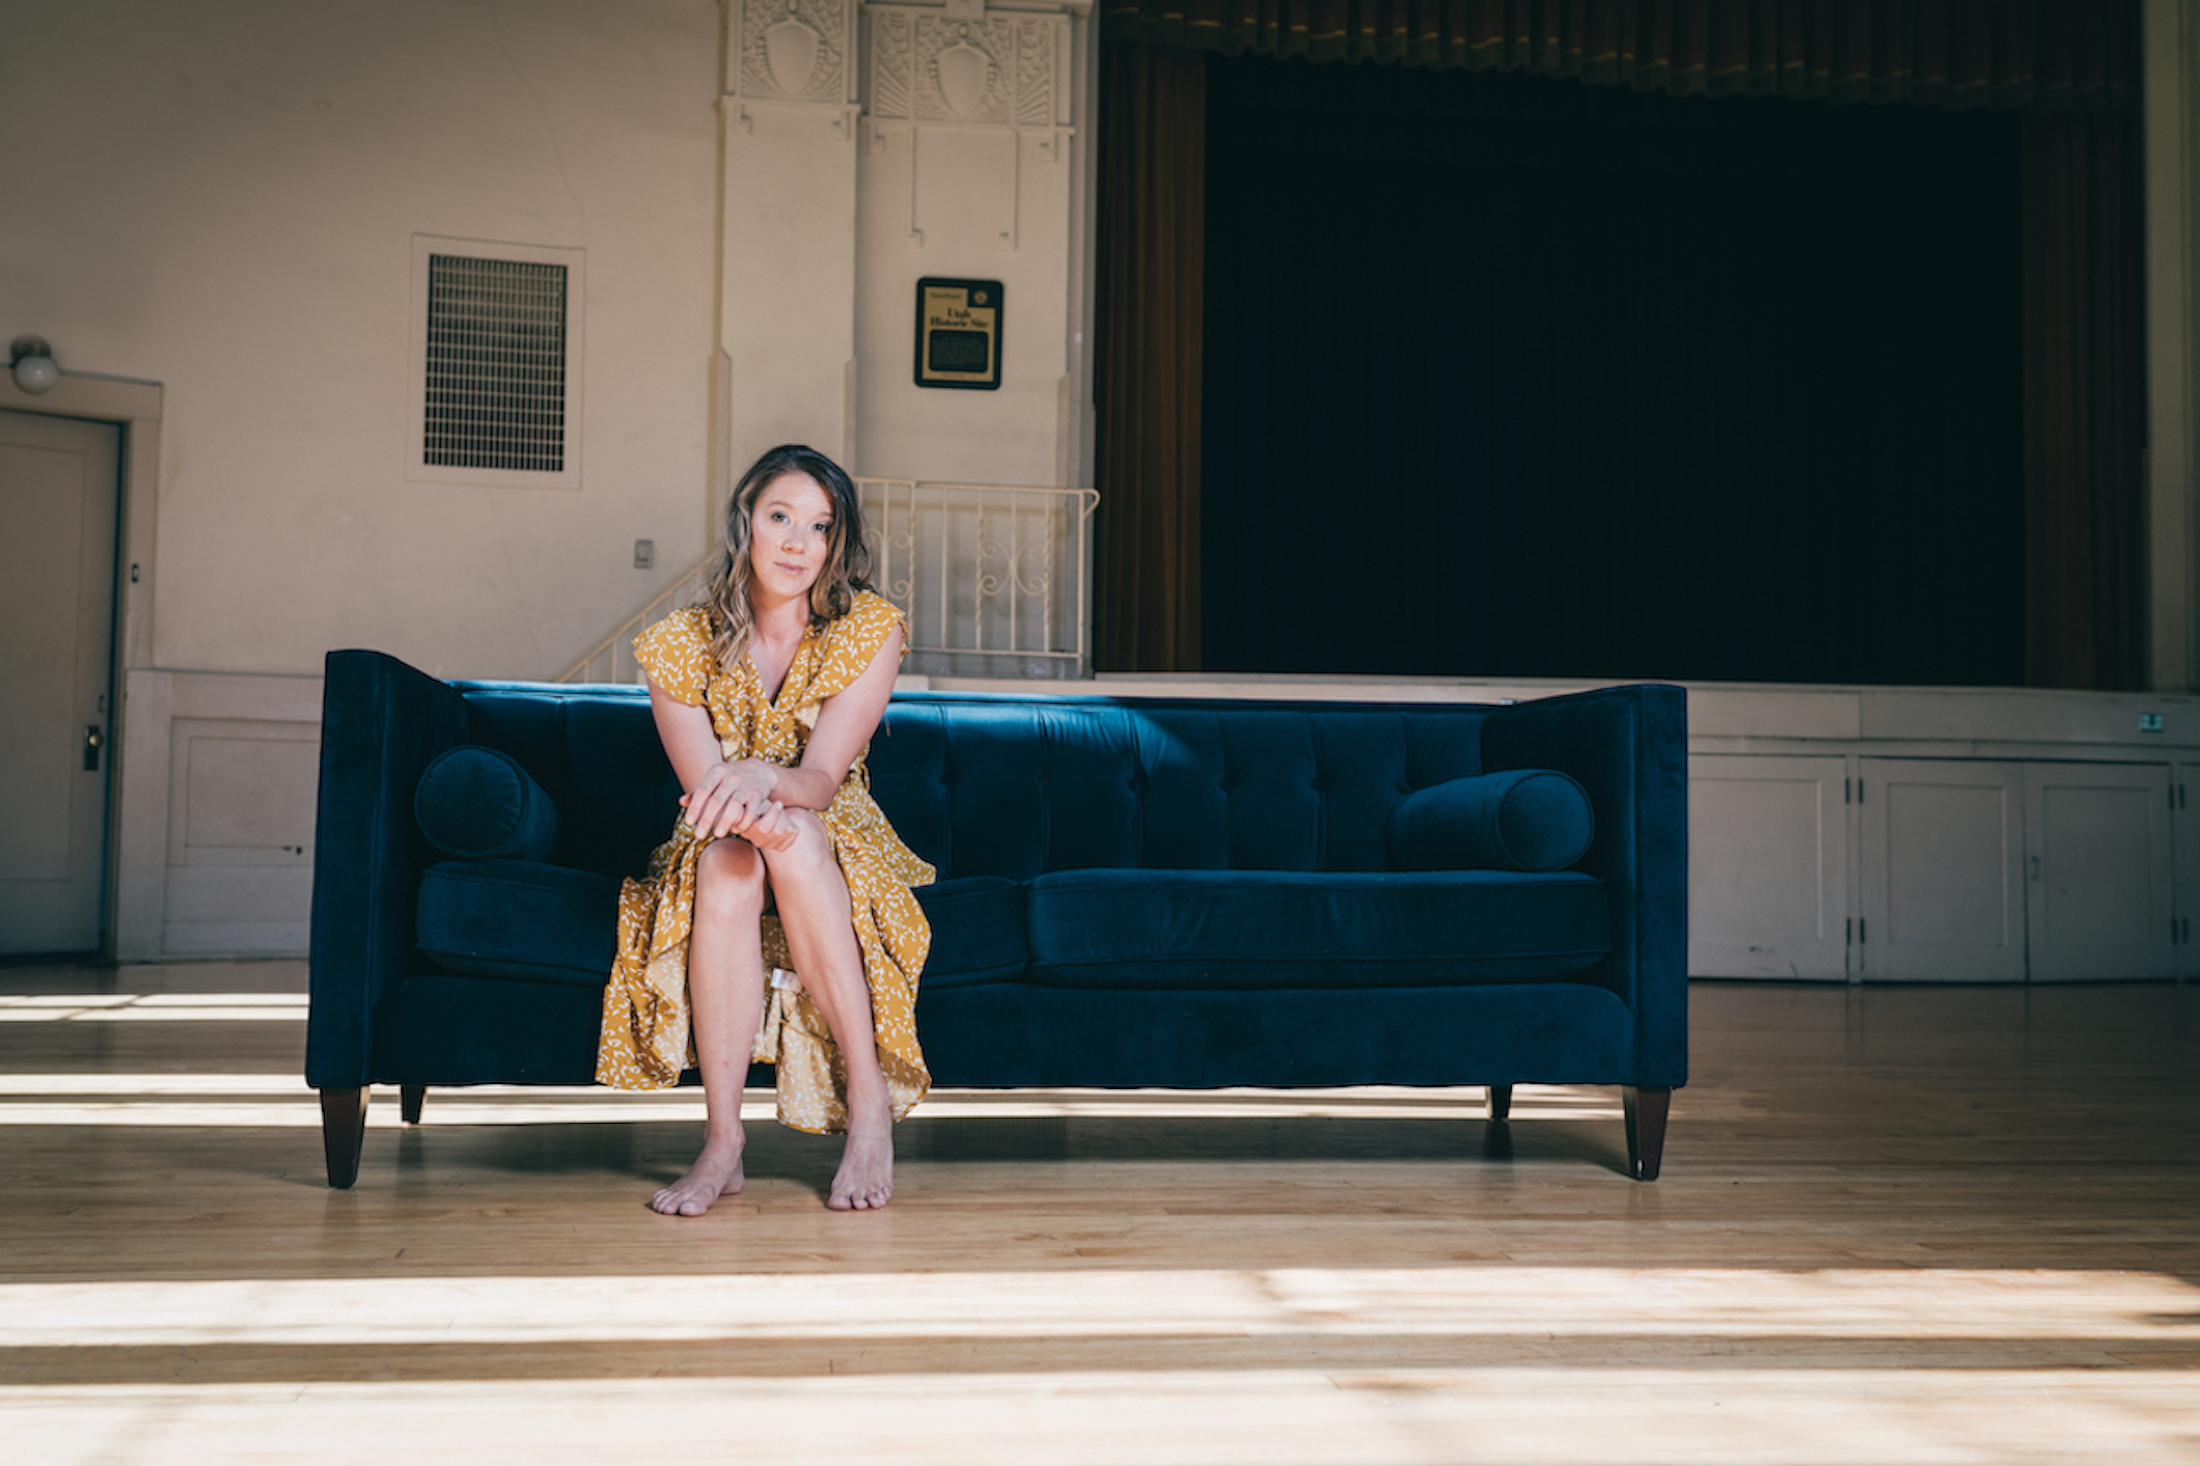 Alicia Stockman Releases Her Debut Album 'These Four Walls'